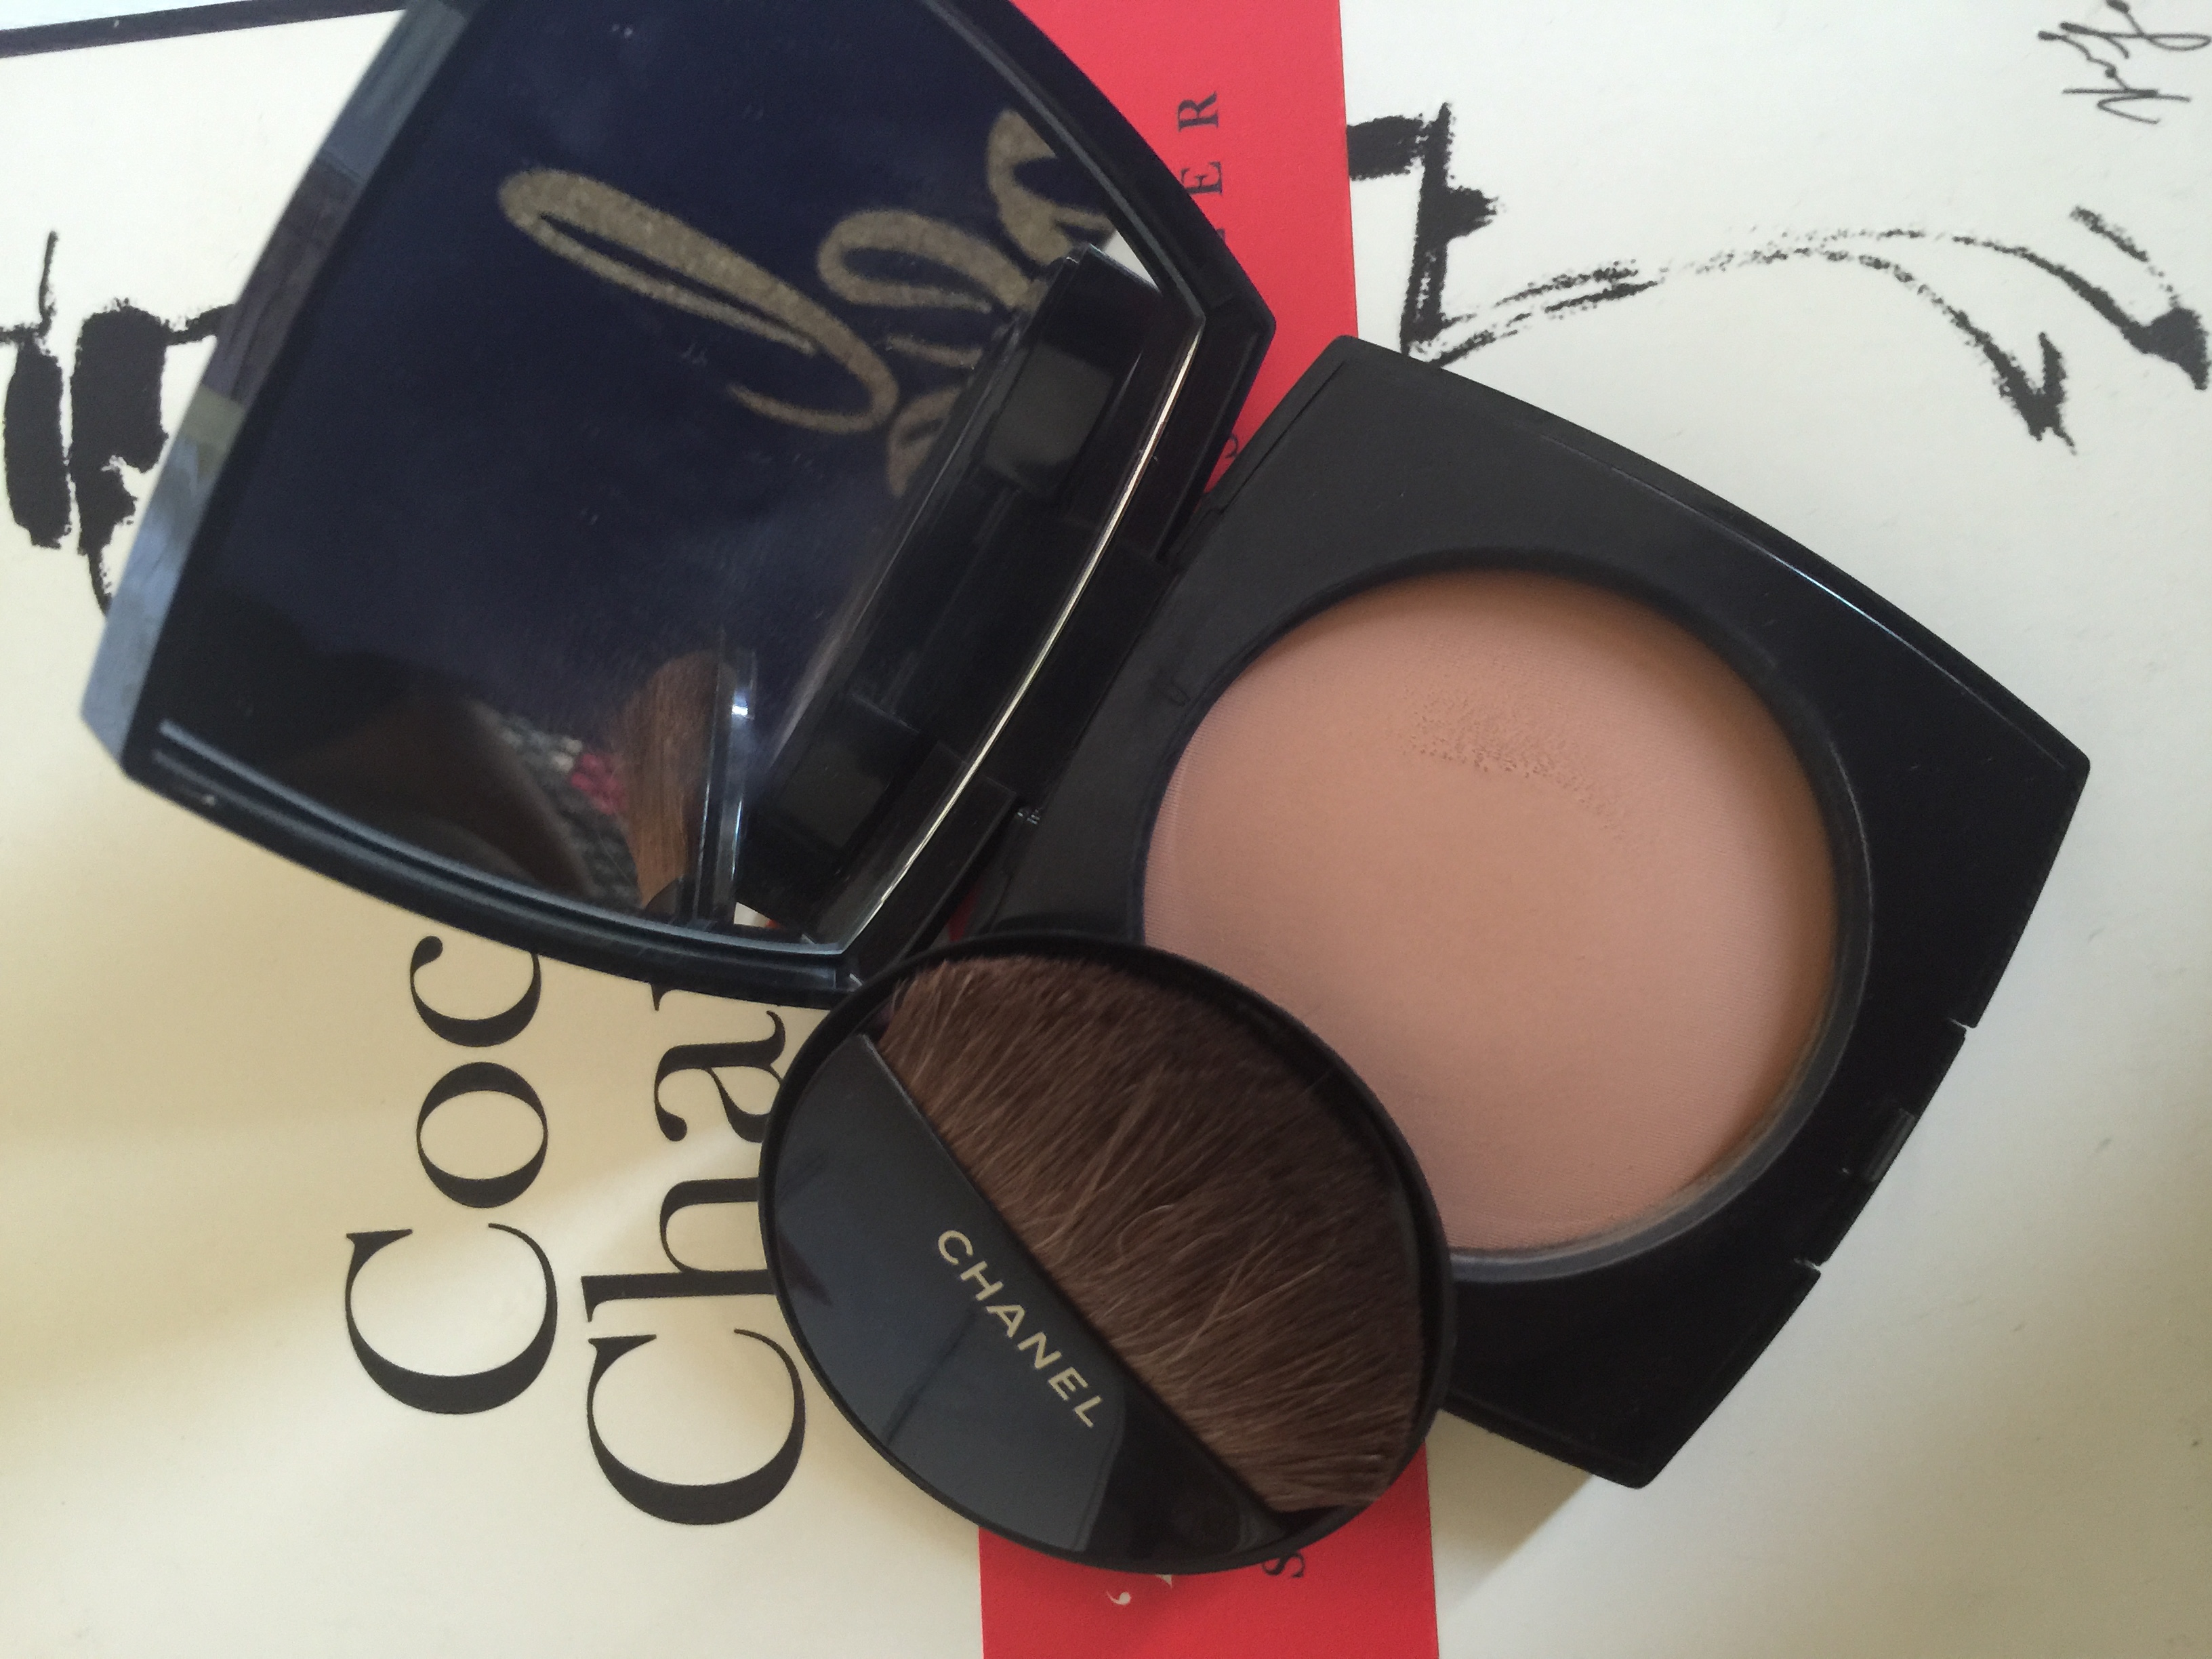 Current Loves: Dupes? Chanel Les Beiges Healthy Glow Sheer Powder